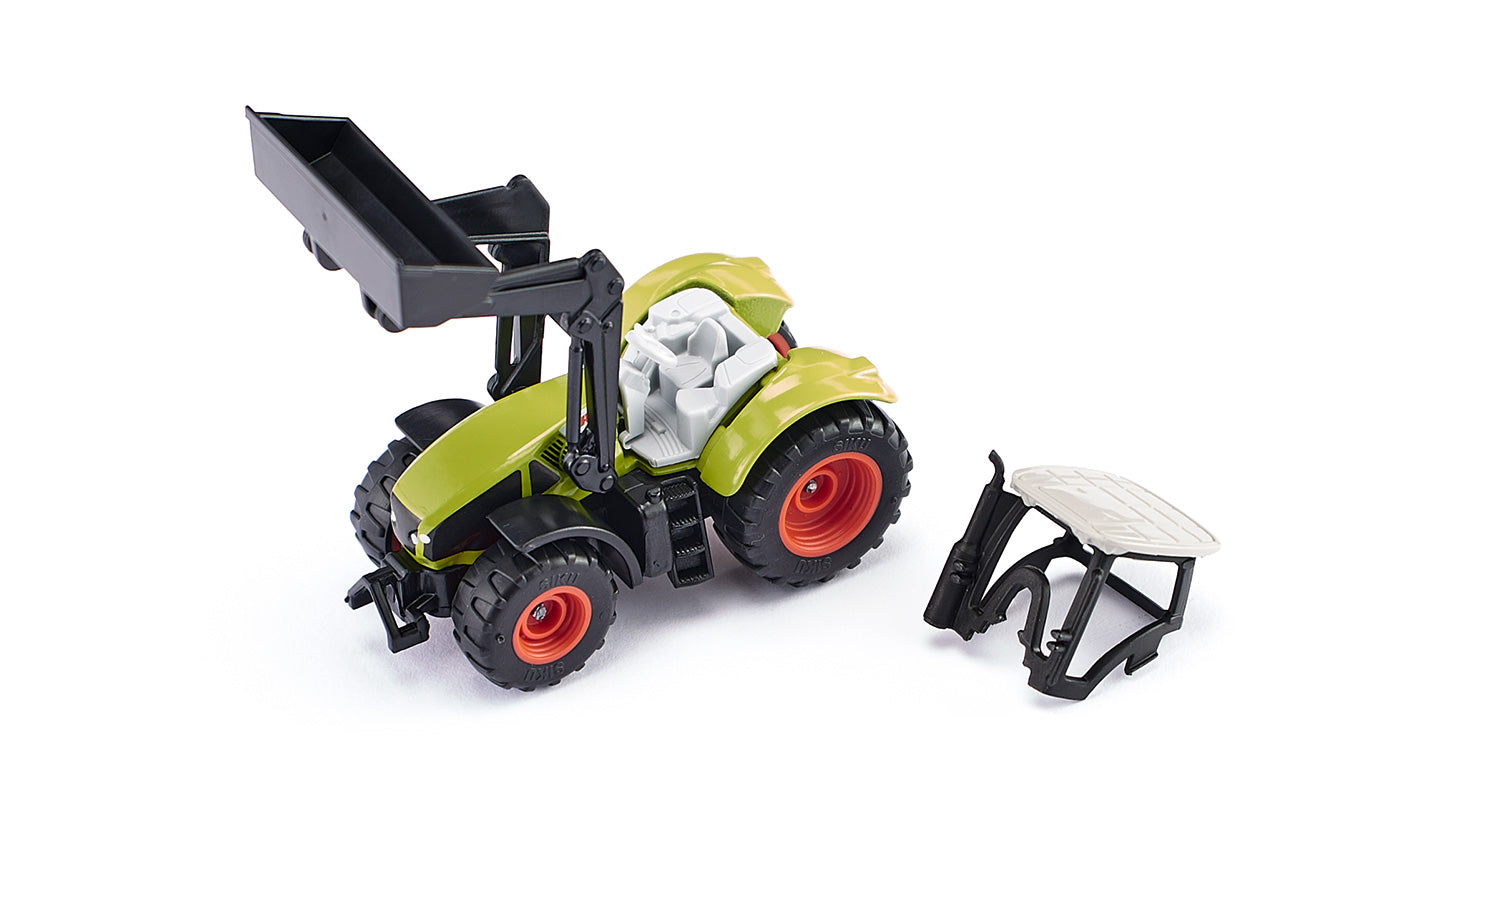 1:87 CLAAS AXION WITH FRONT LOADER